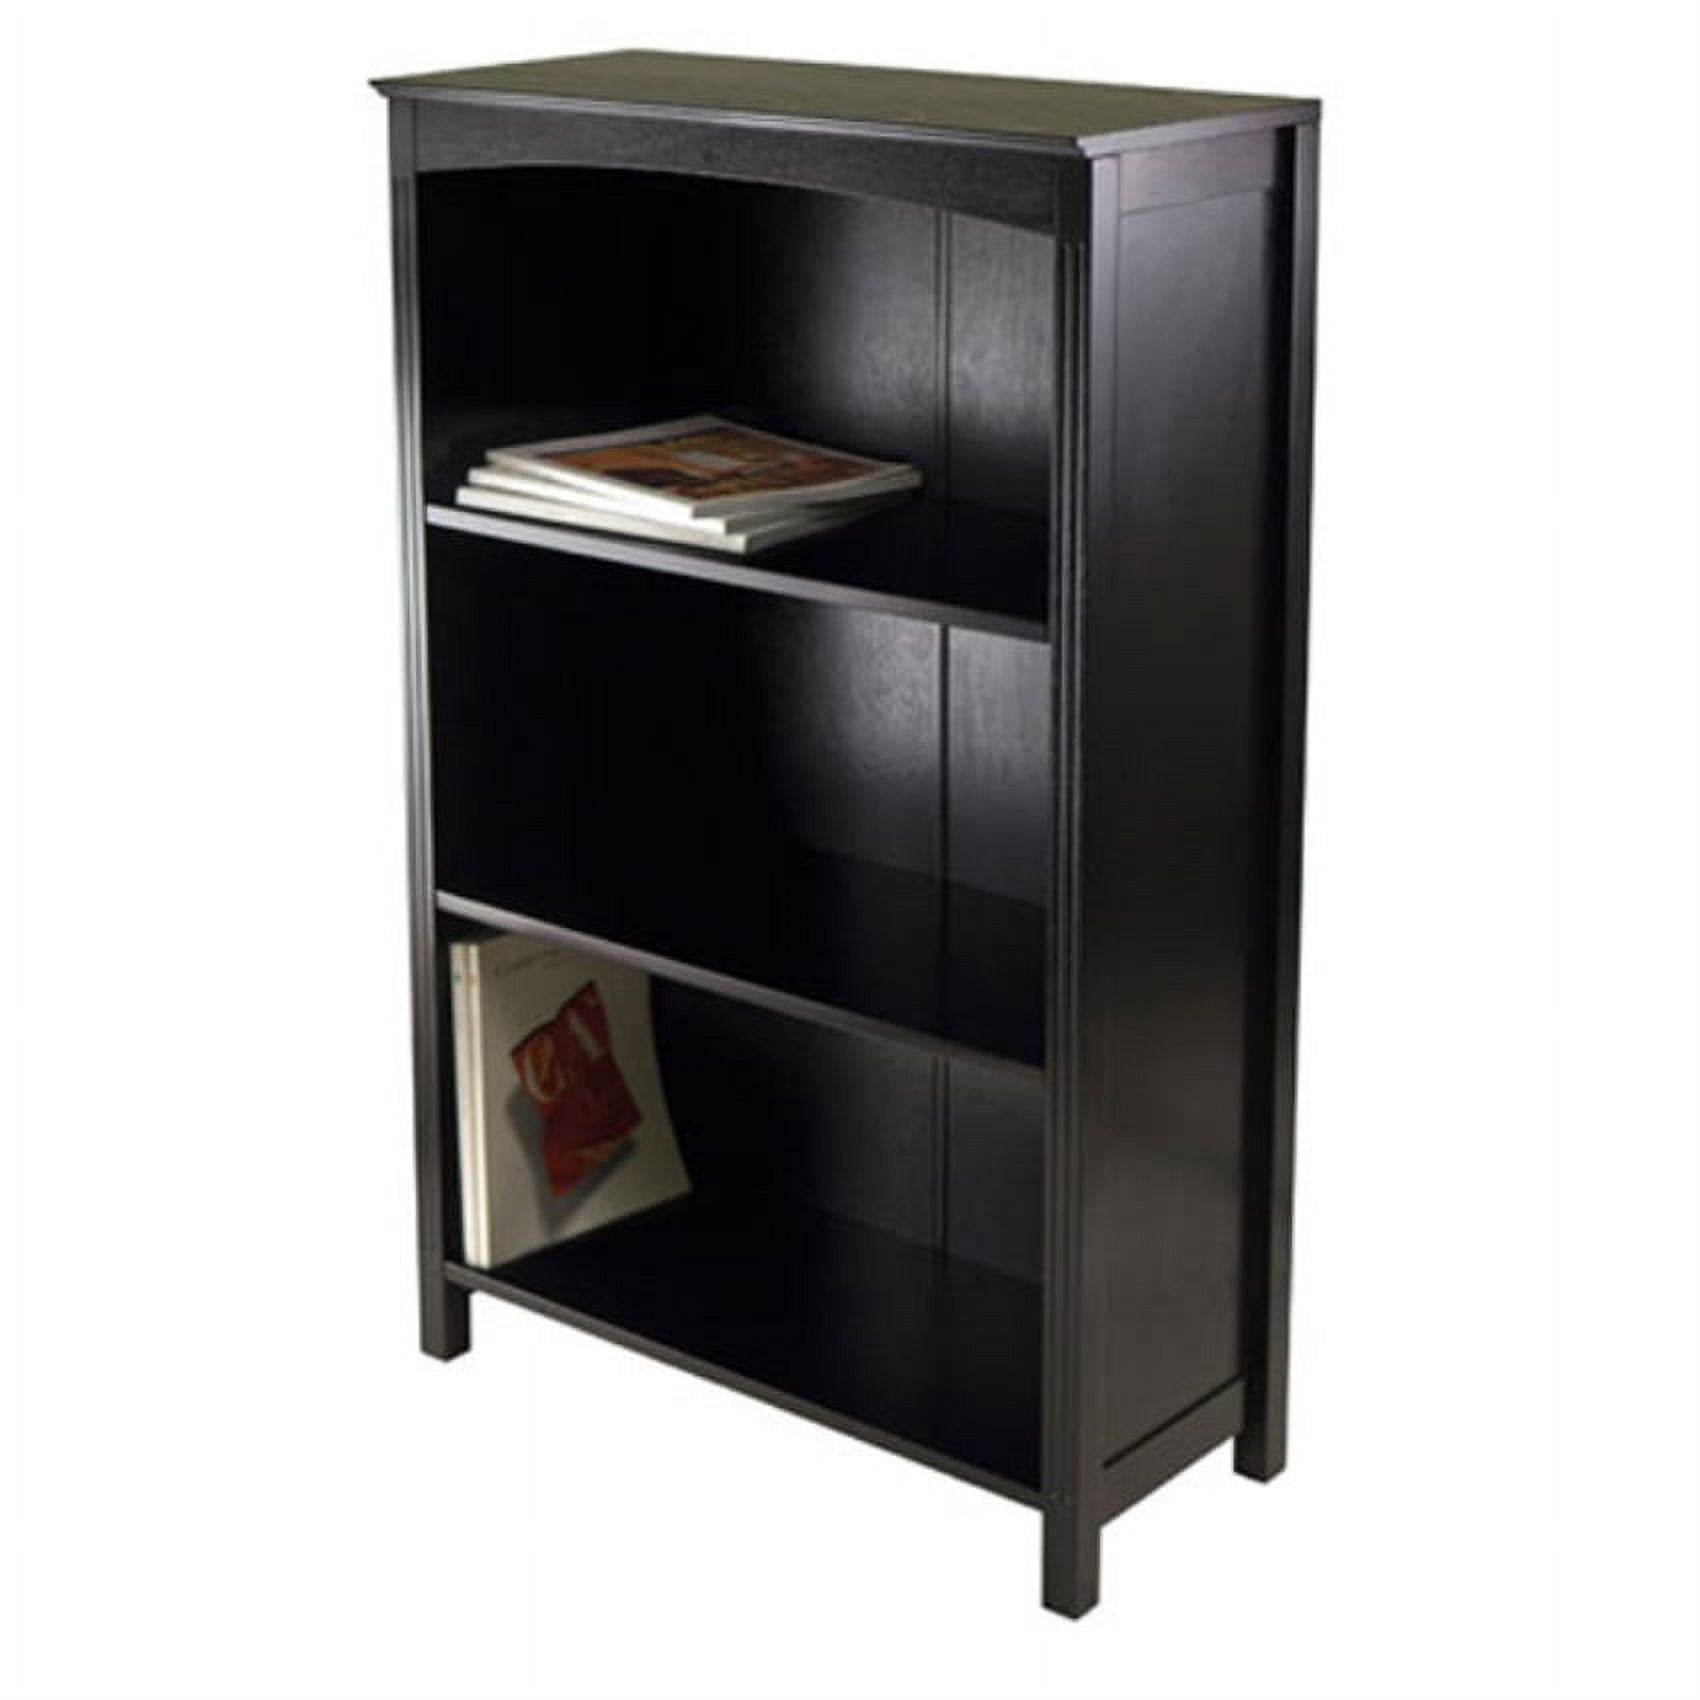 BEHOST 6 Shelf Bookcase, 70in Tall Bookshelf with 2 Drawers, set